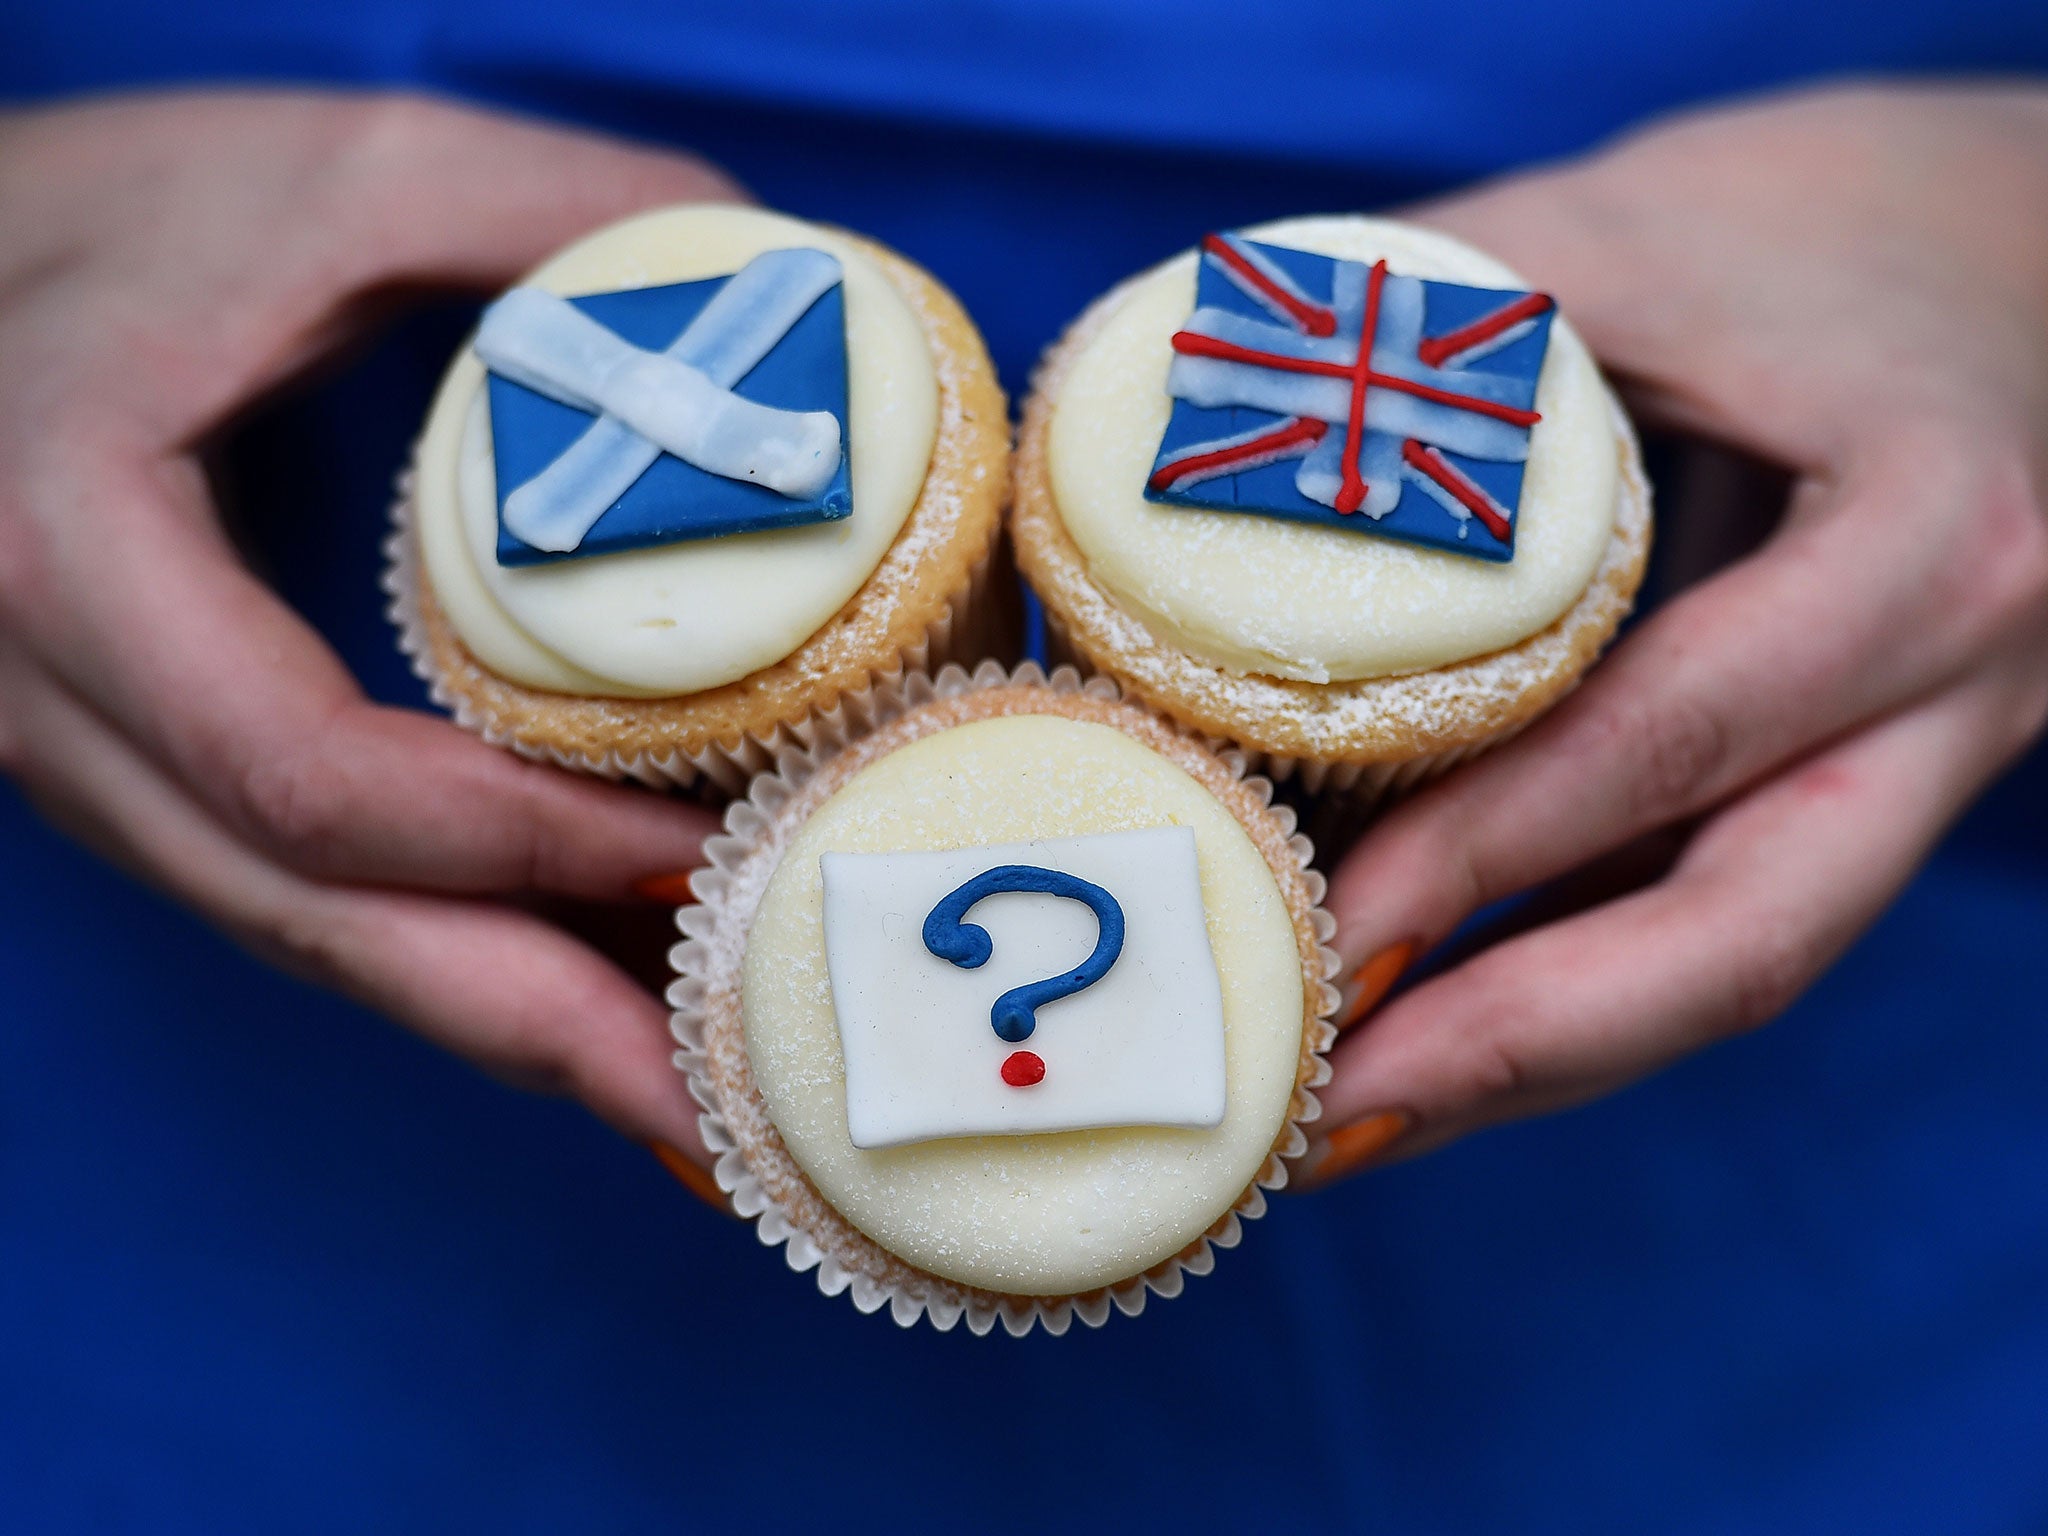 'Referendum cupcakes' featuring a Scottish Saltire, (L) a Union flag (R) and a question mark (Below) symbolising the 'undecided voter' are pictured at a bakery in Edinburgh, Scotland.